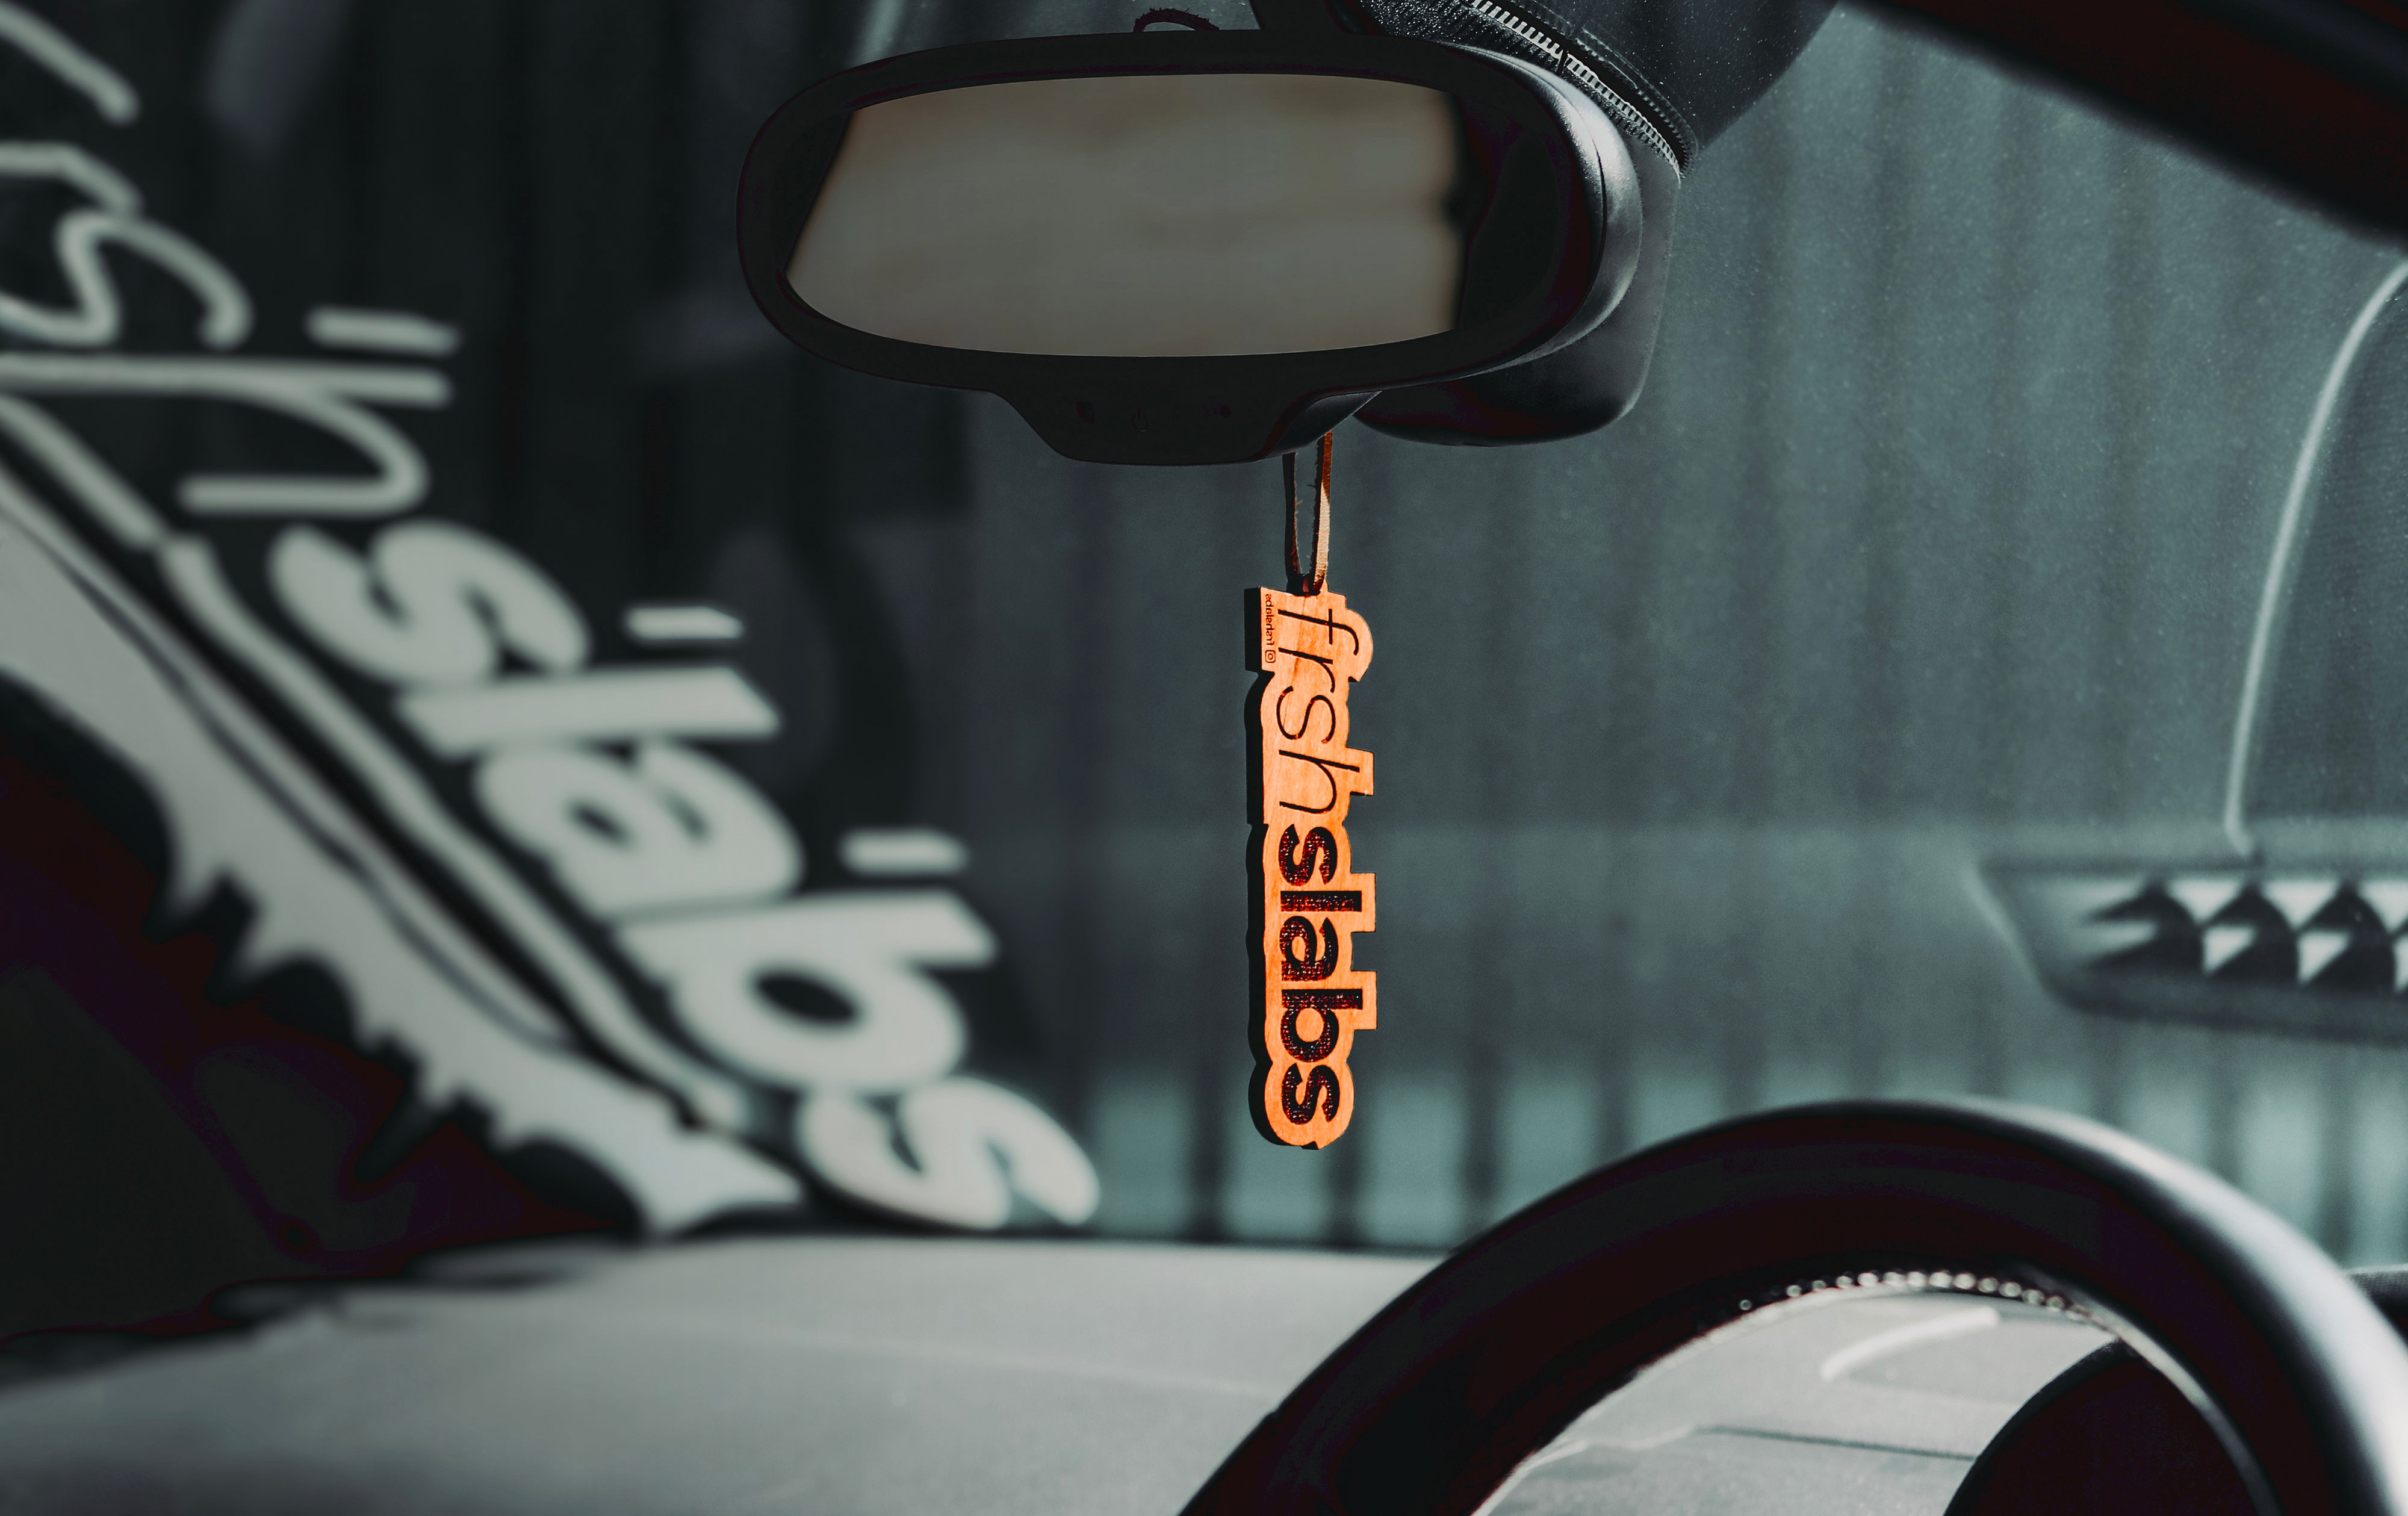 Personalised Custom Car Air Freshener With Your Car's photo